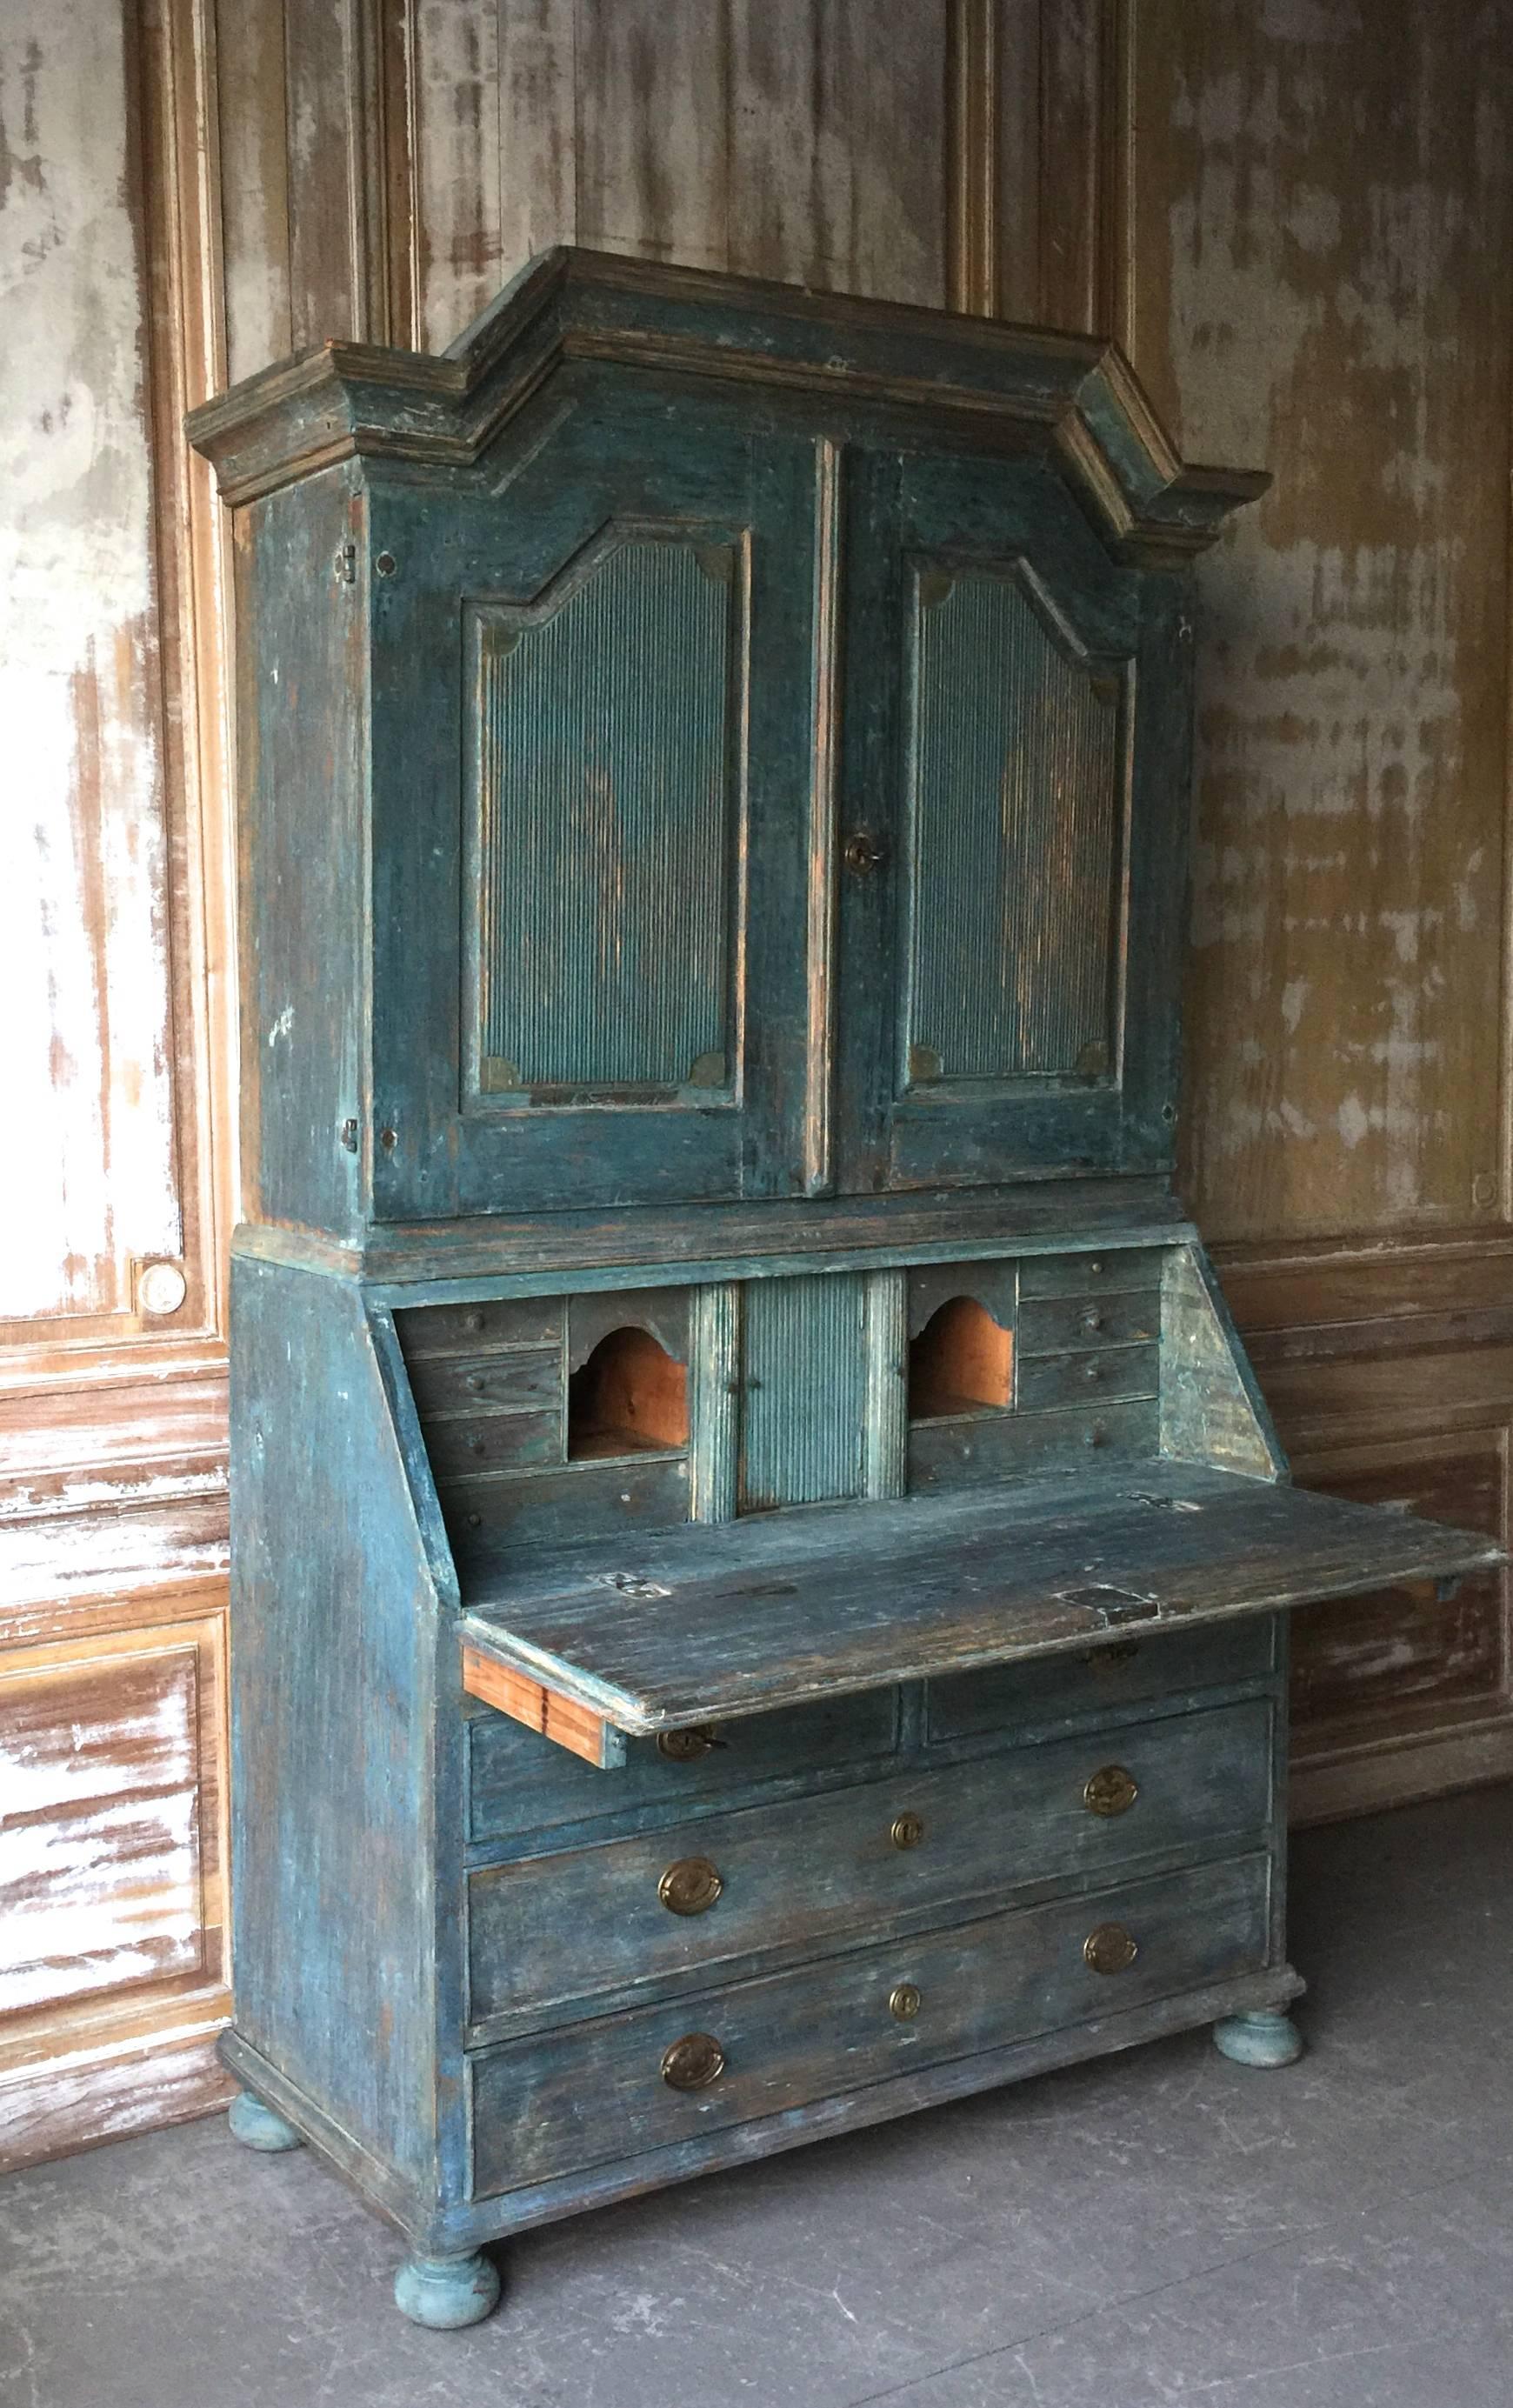 A very fine example of early 19th century secretaire cabinet of Gustavian period with a high arching pediment cornice and reeded panelled doors. The fall front desk with multitude of drawers and compartments in wonderful sky blue paint over the